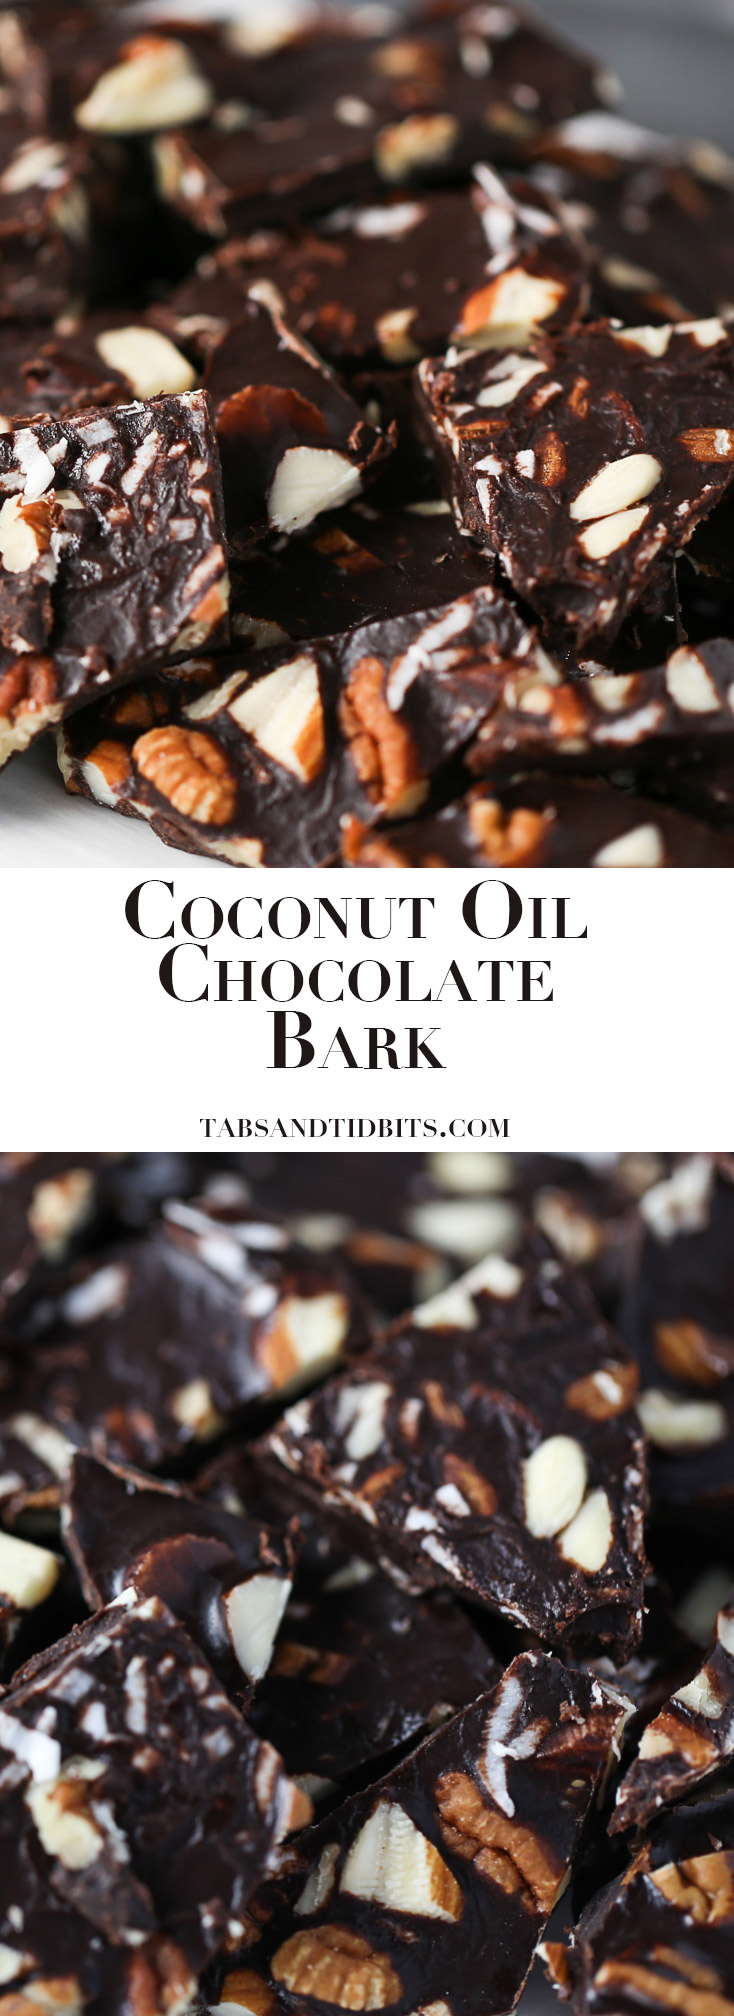 Coconut Oil Chocolate Bark - Chocolate bark with nuts and coconut and, of course, coconut oil!